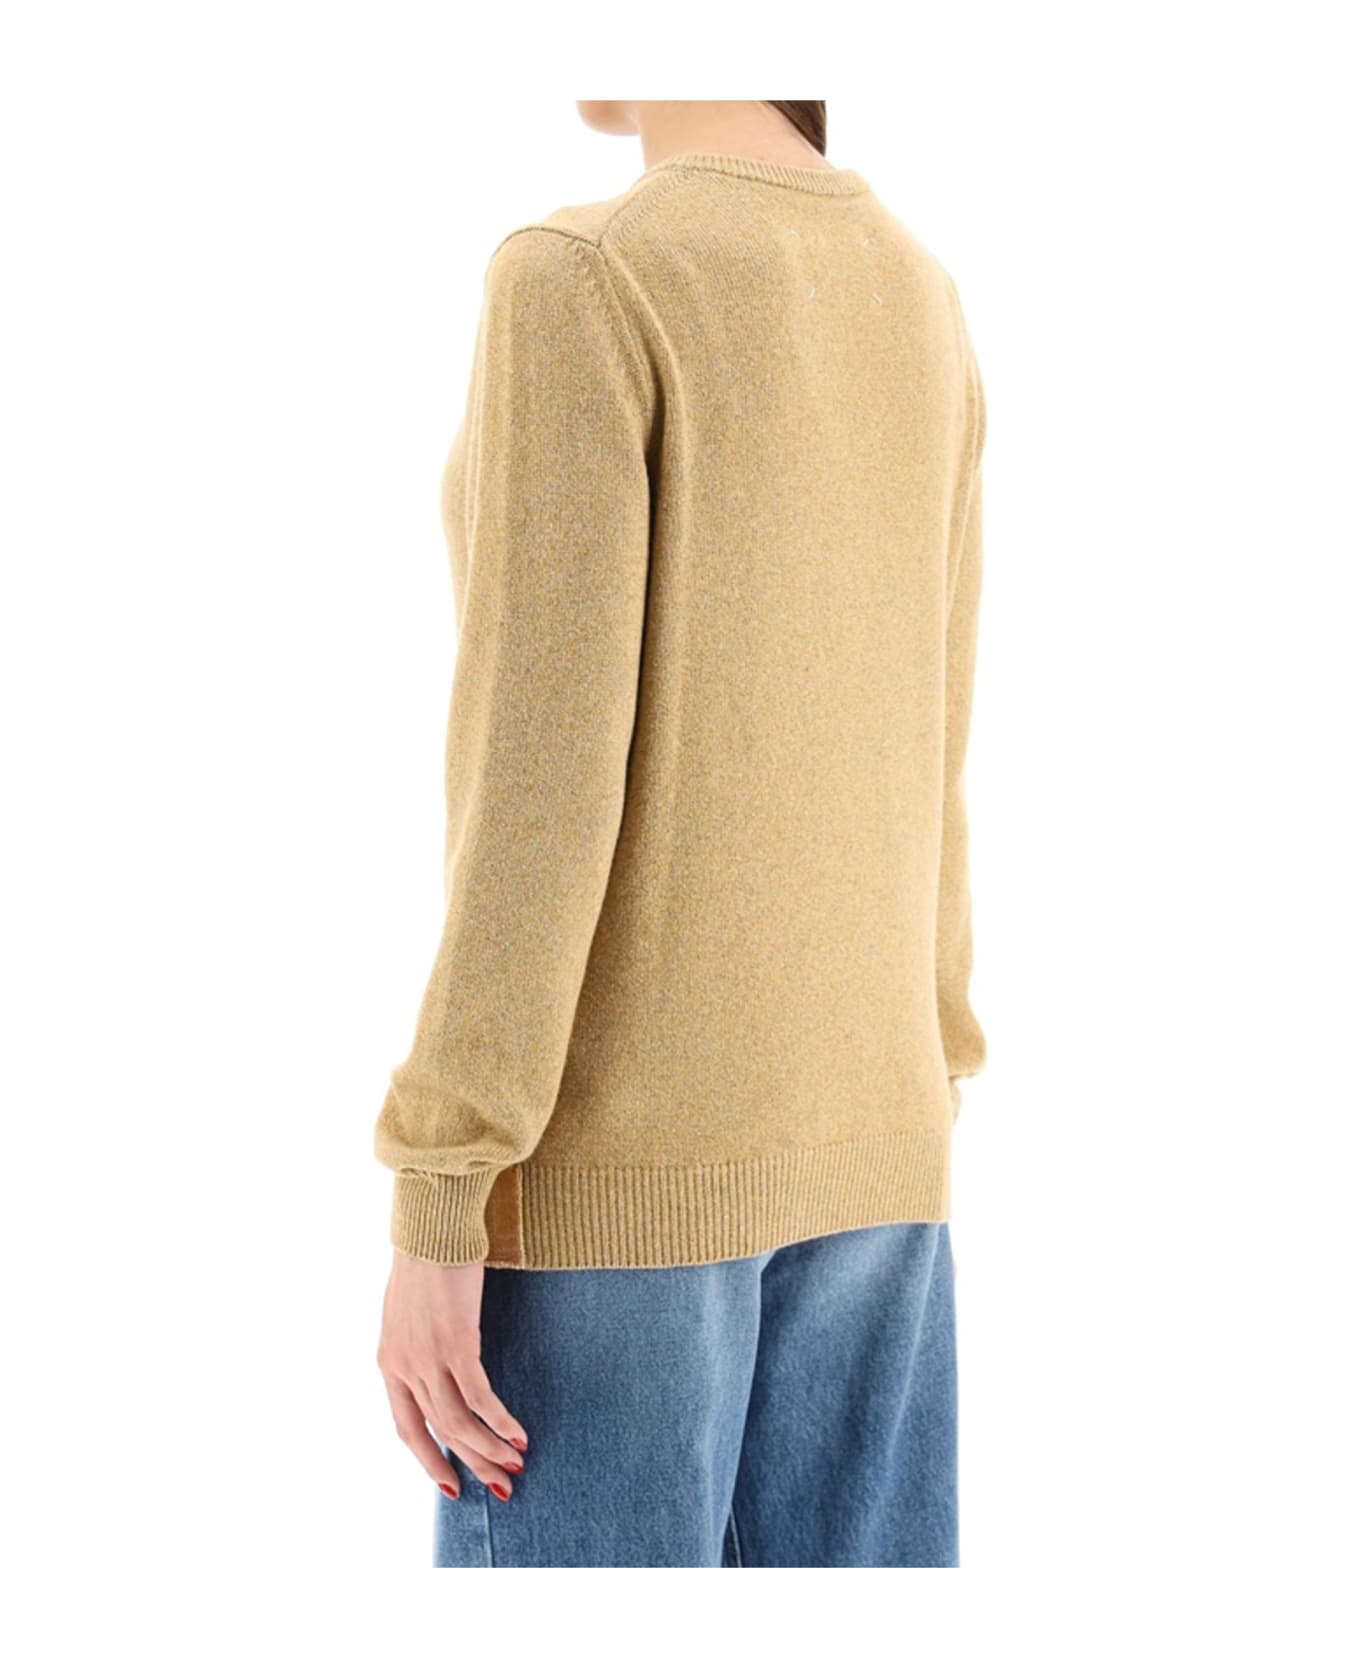 Maison Margiela Wool And Cashmere Sweater - Brown